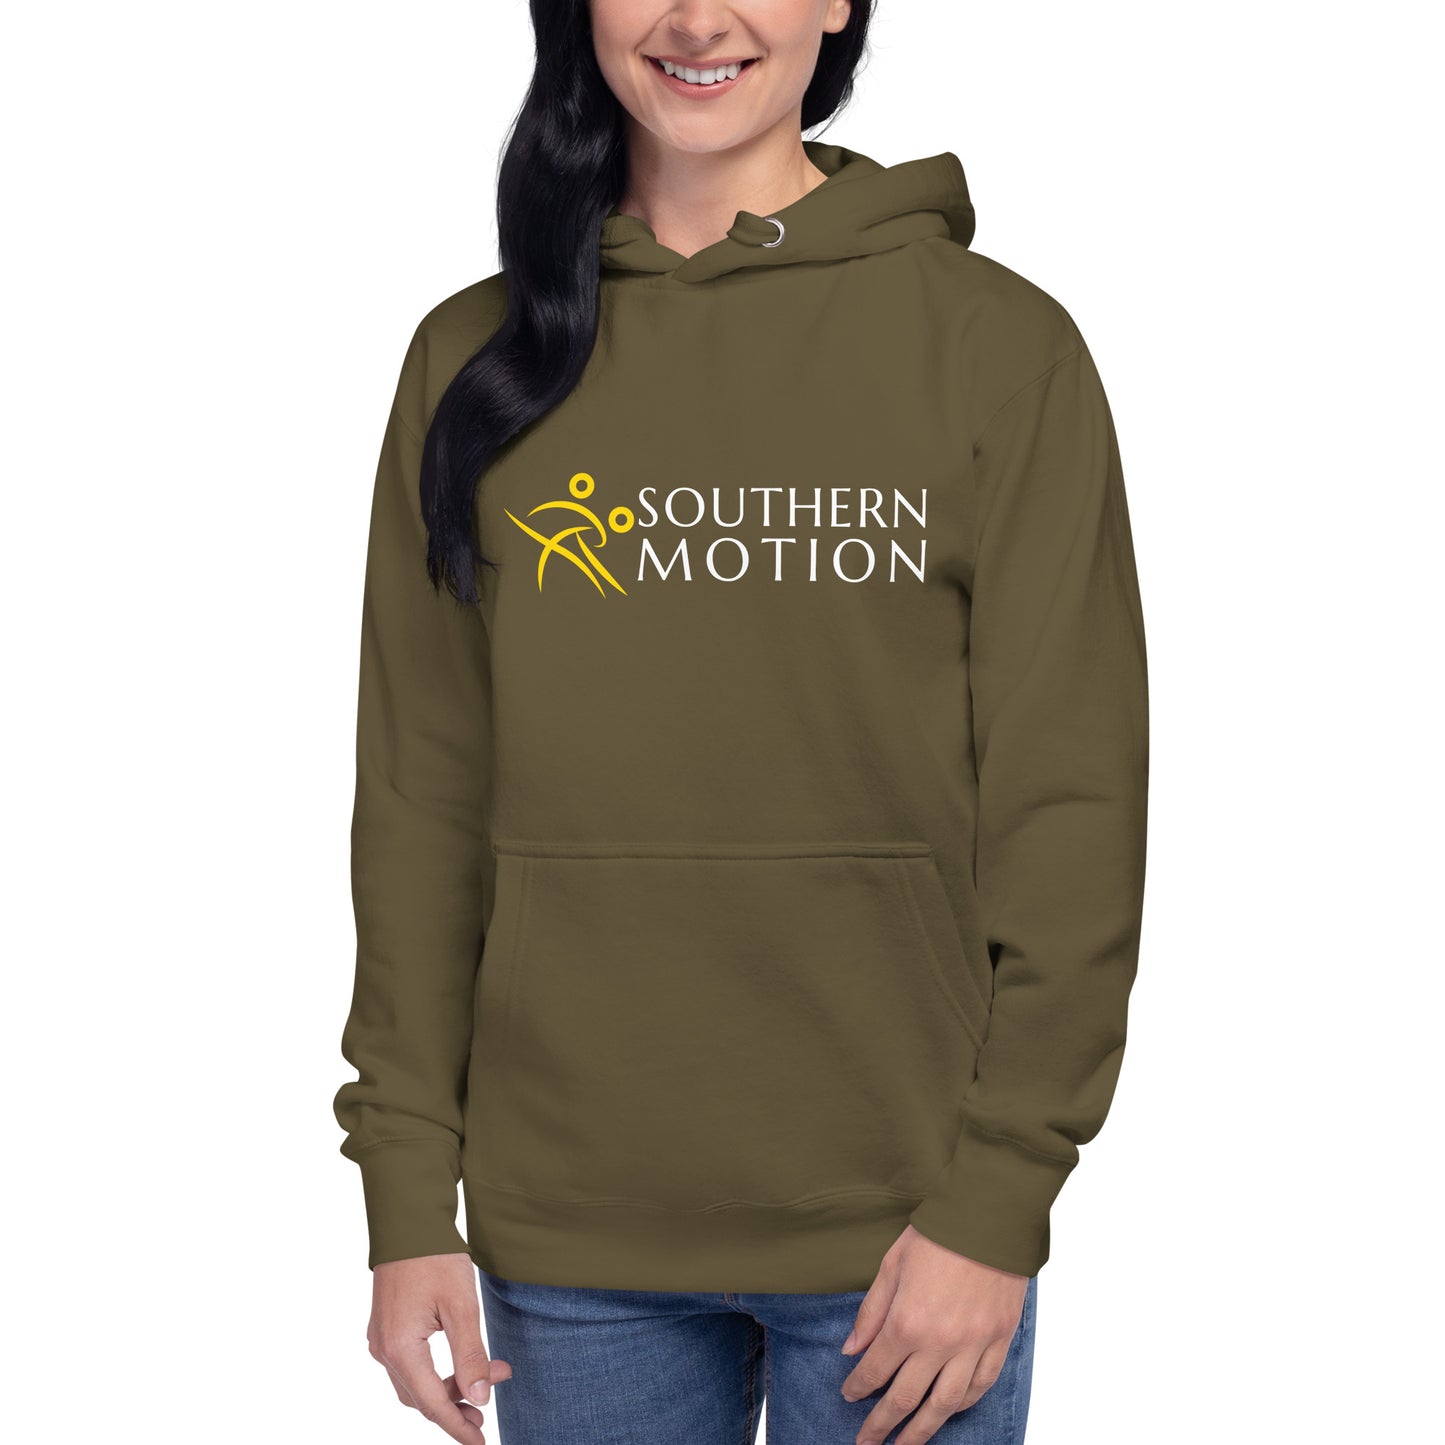 Southern Motion Unisex Hoodie